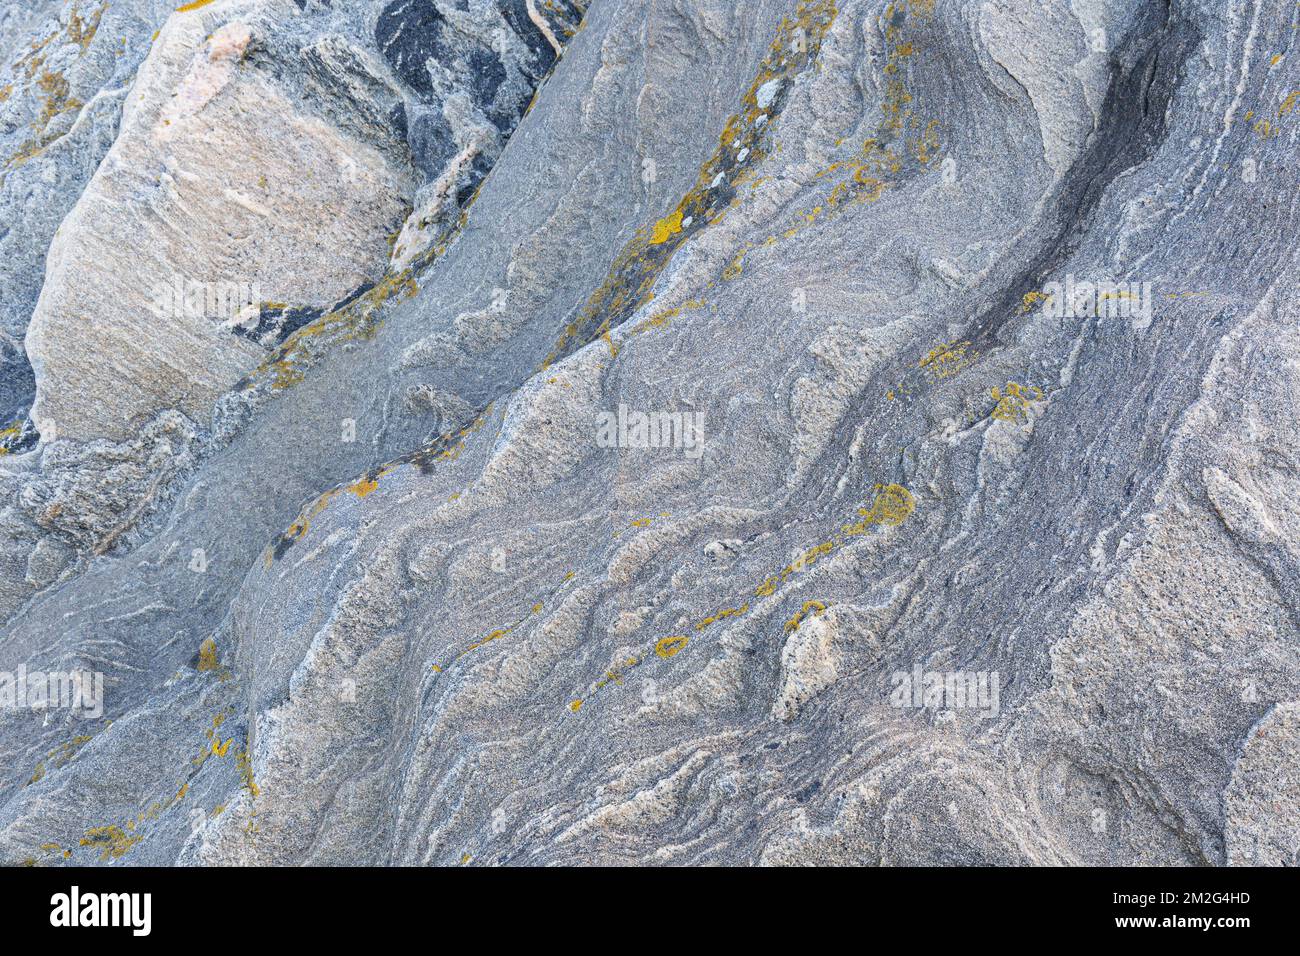 Close-up of a strange and beautiful rock surface with yellow lichen, side view. Abstract full frame natural textured background. Stock Photo